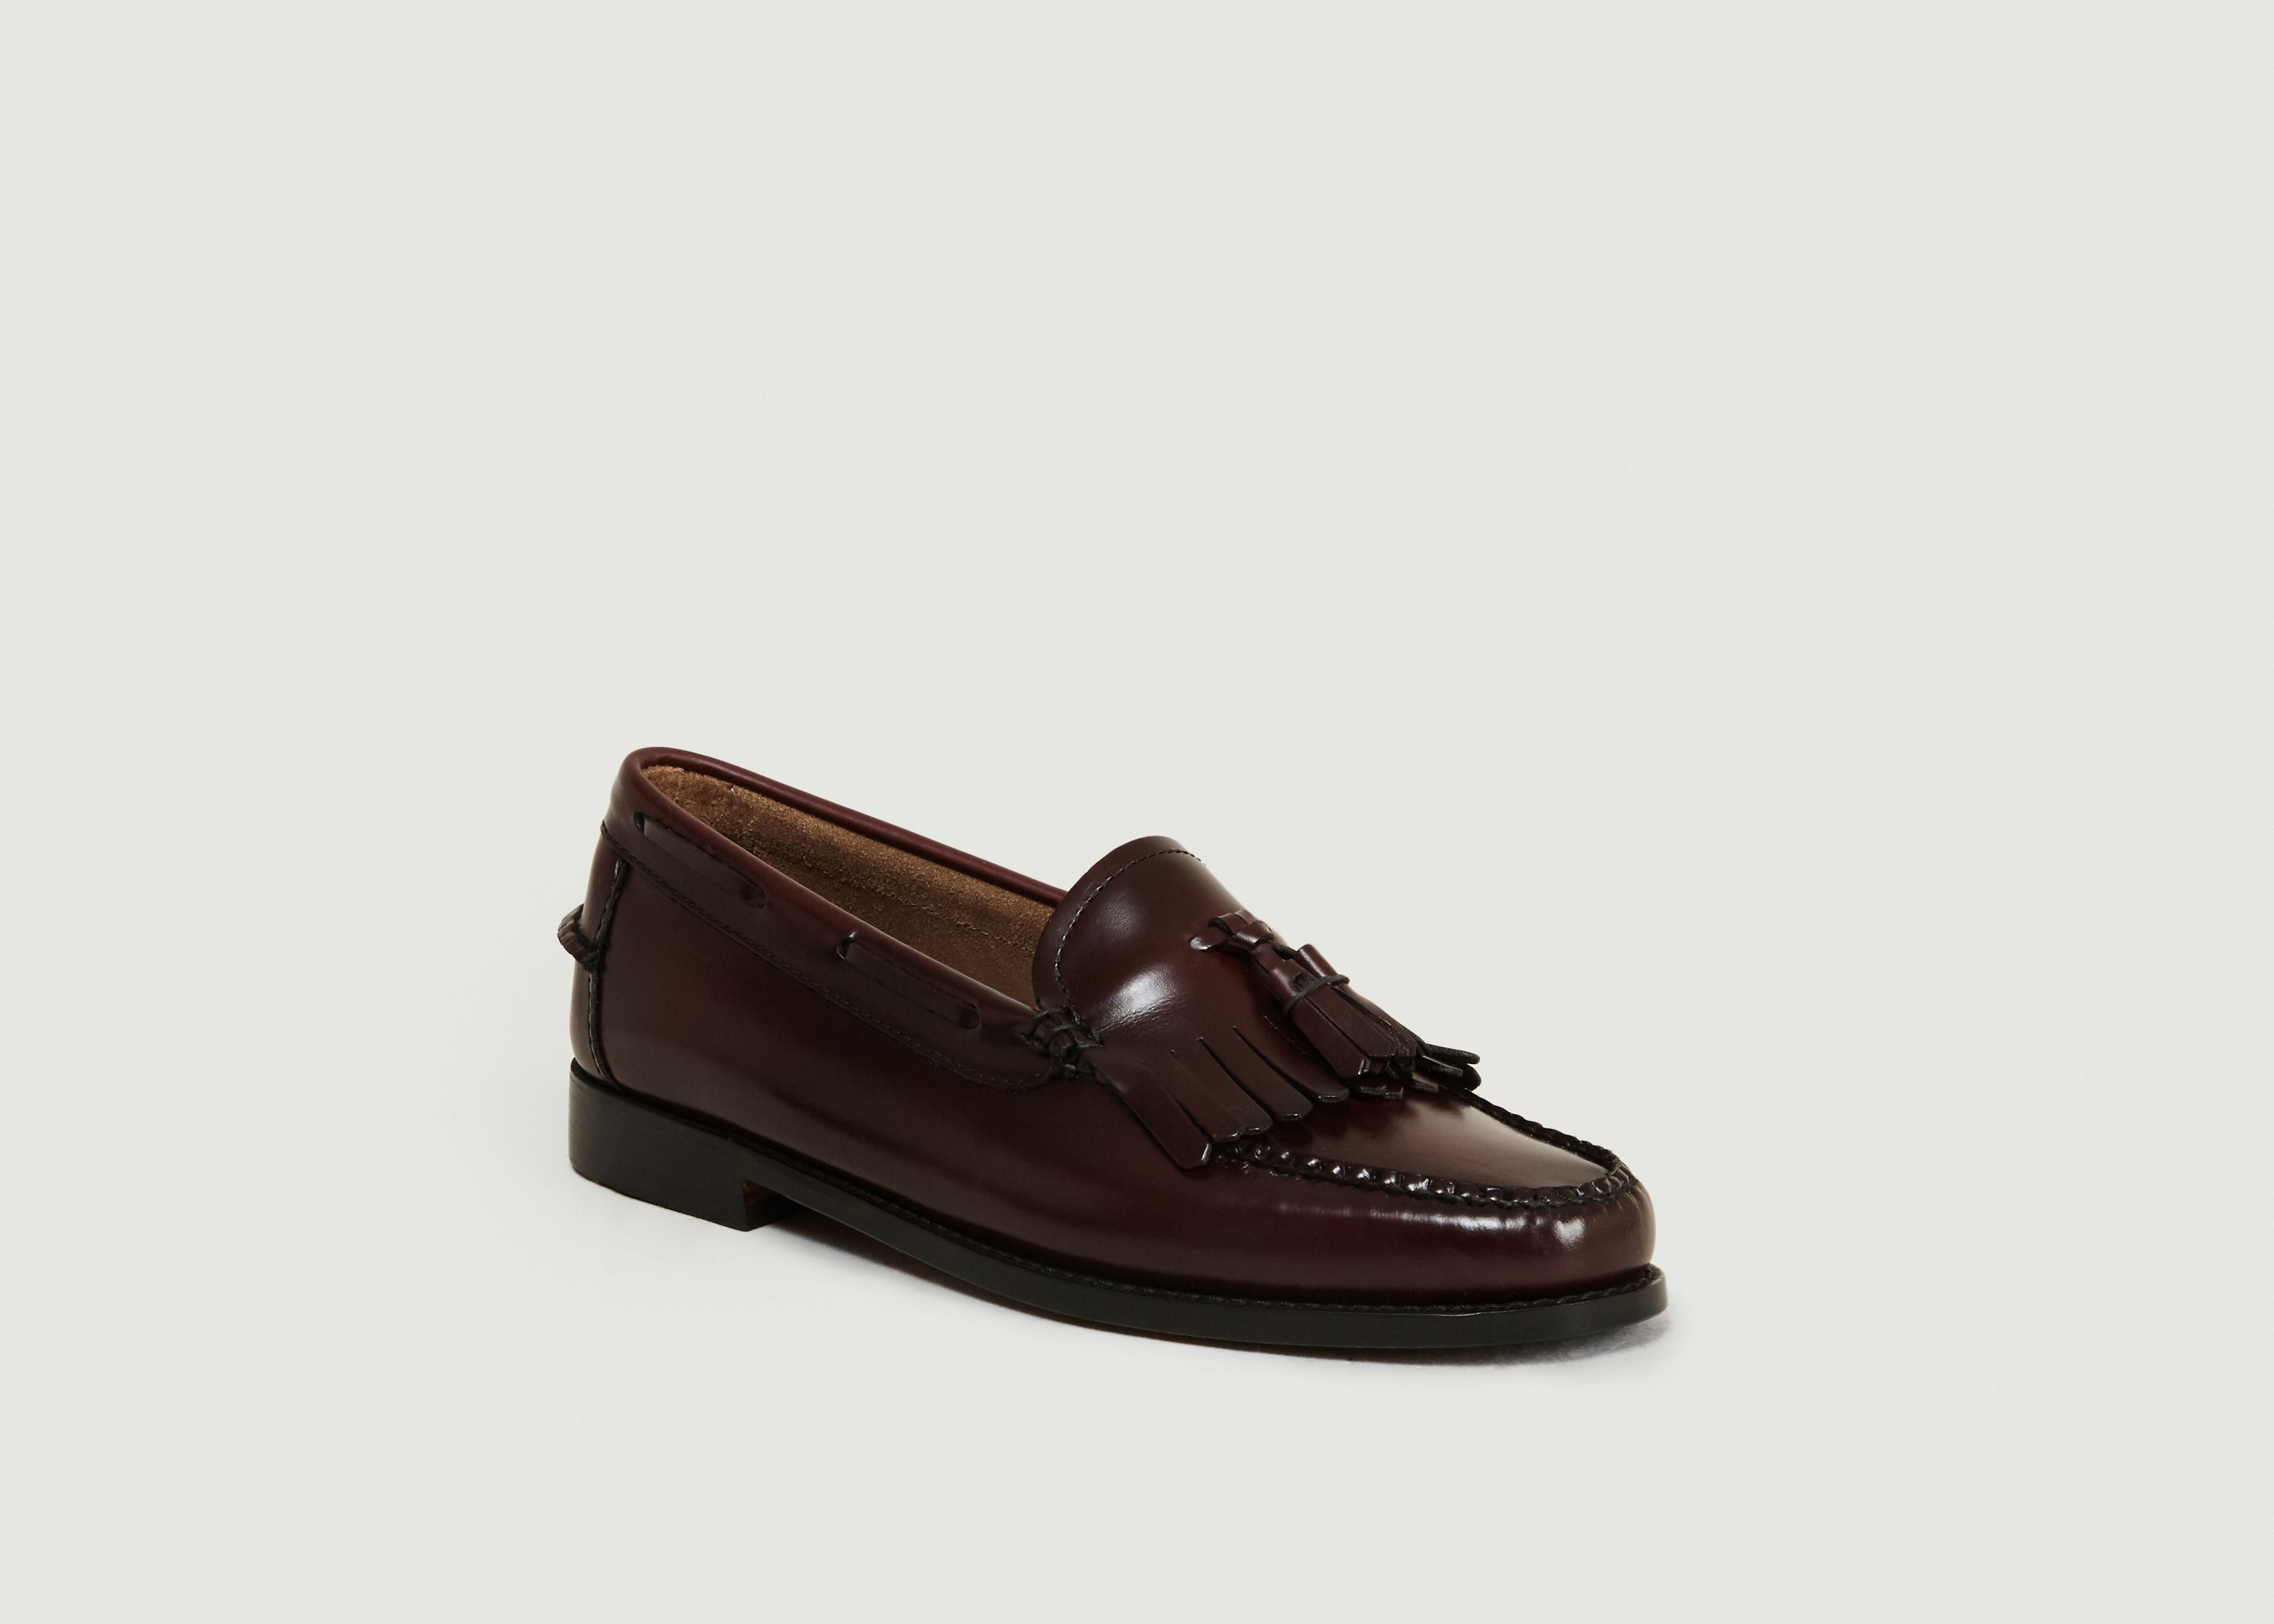 Weejuns Esther Kiltie Loafers - G.H.Bass